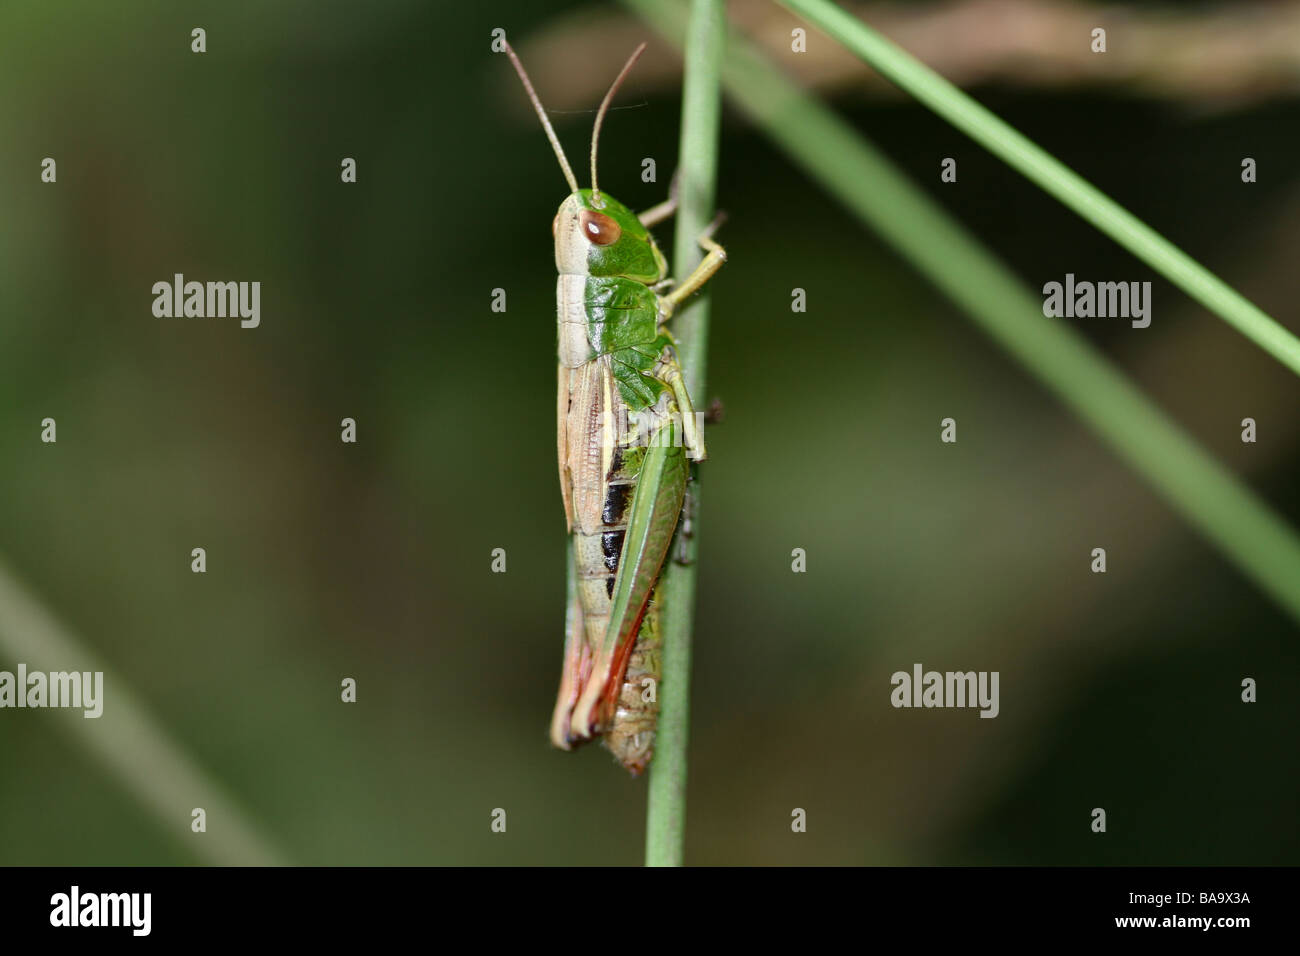 Meadow Grasshopper in macro detail on blade of Grass Stock Photo